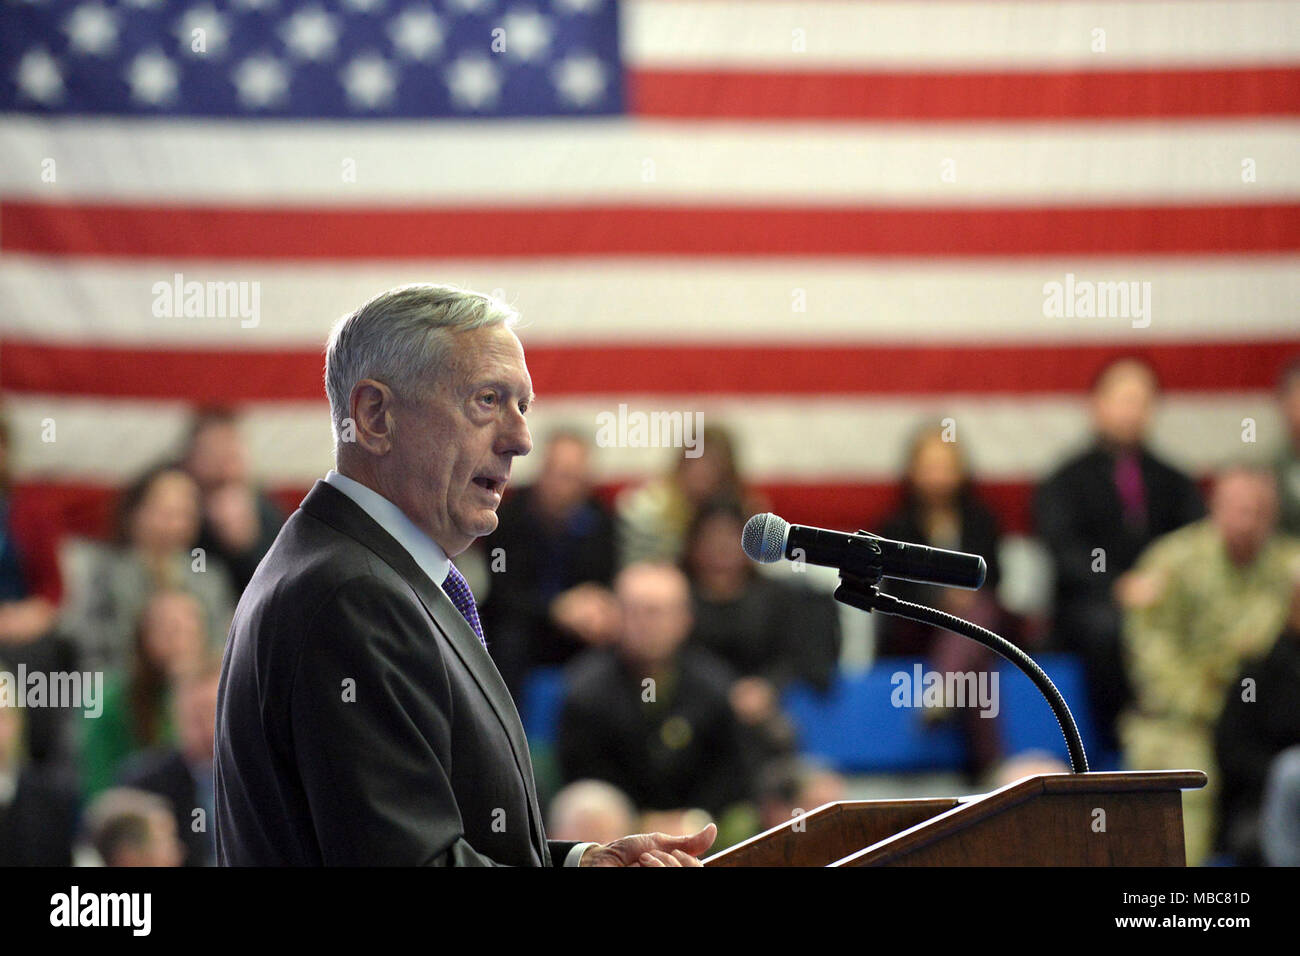 Secretary of Defense Jim Mattis led a town hall meeting with military and Civilian personnel at U.S. European Command during the Stuttgart, Germany, stop of his trip to Europe February 15, 2018. Secretary Mattis's speech and following Q&A focused on support to NATO, ready forces and the concept that 'Deterrence is Dynamic'. (U.S. Army Stock Photo